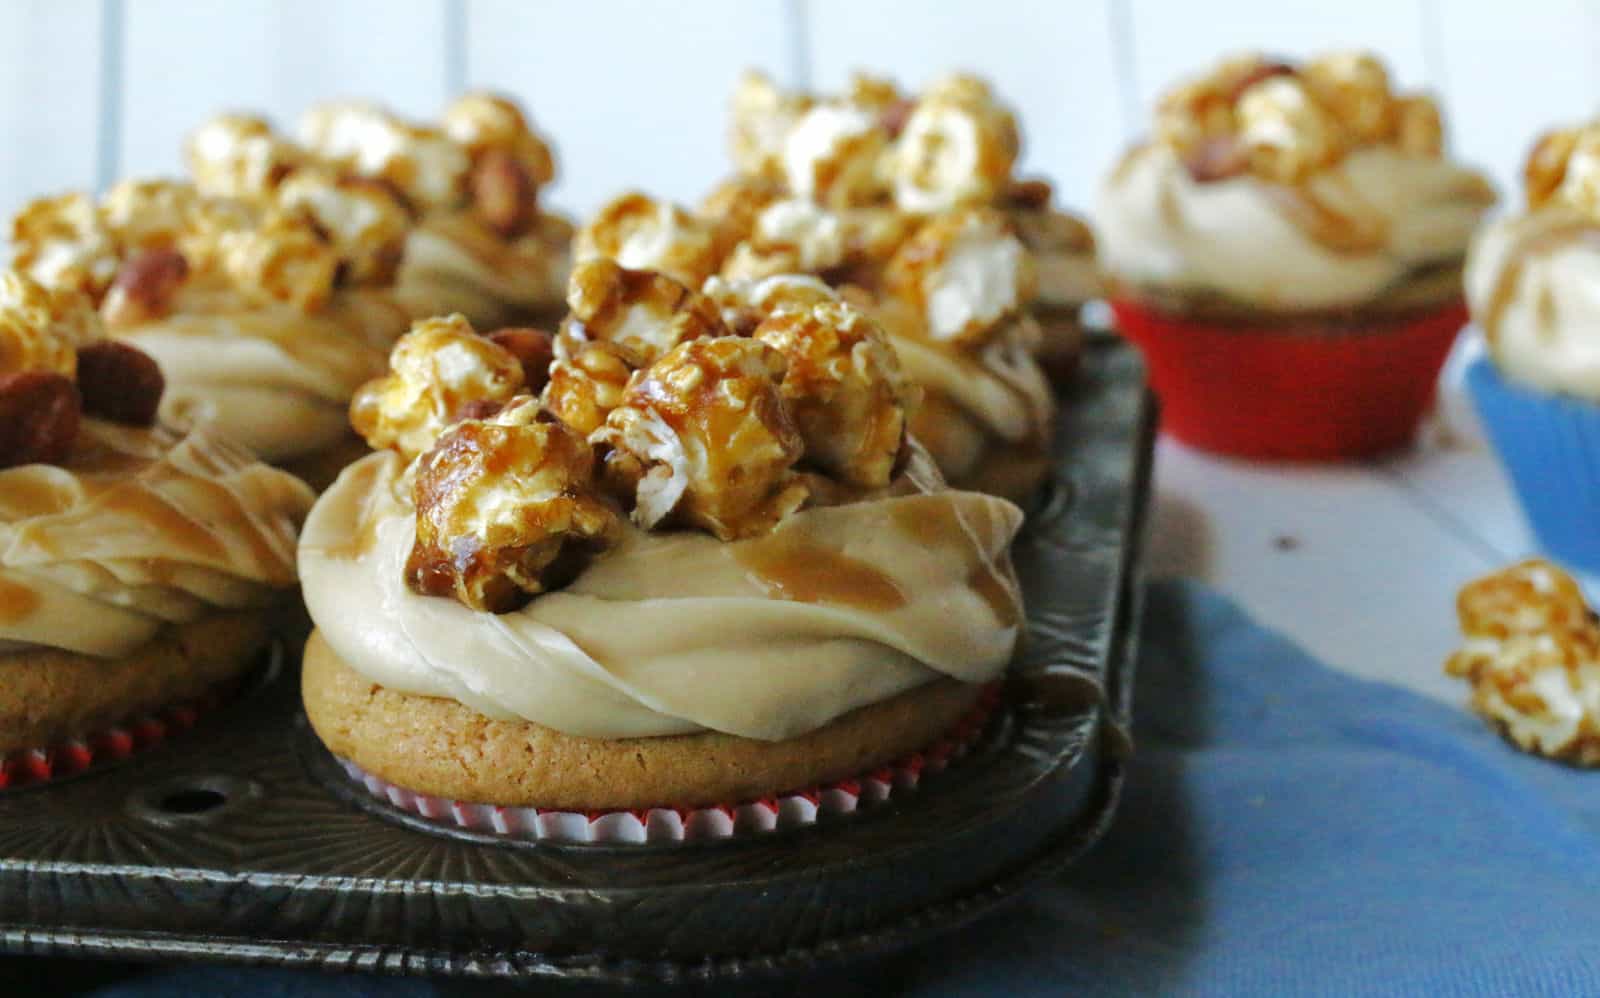 A tray of cupcakes topped with caramel and popcorn.